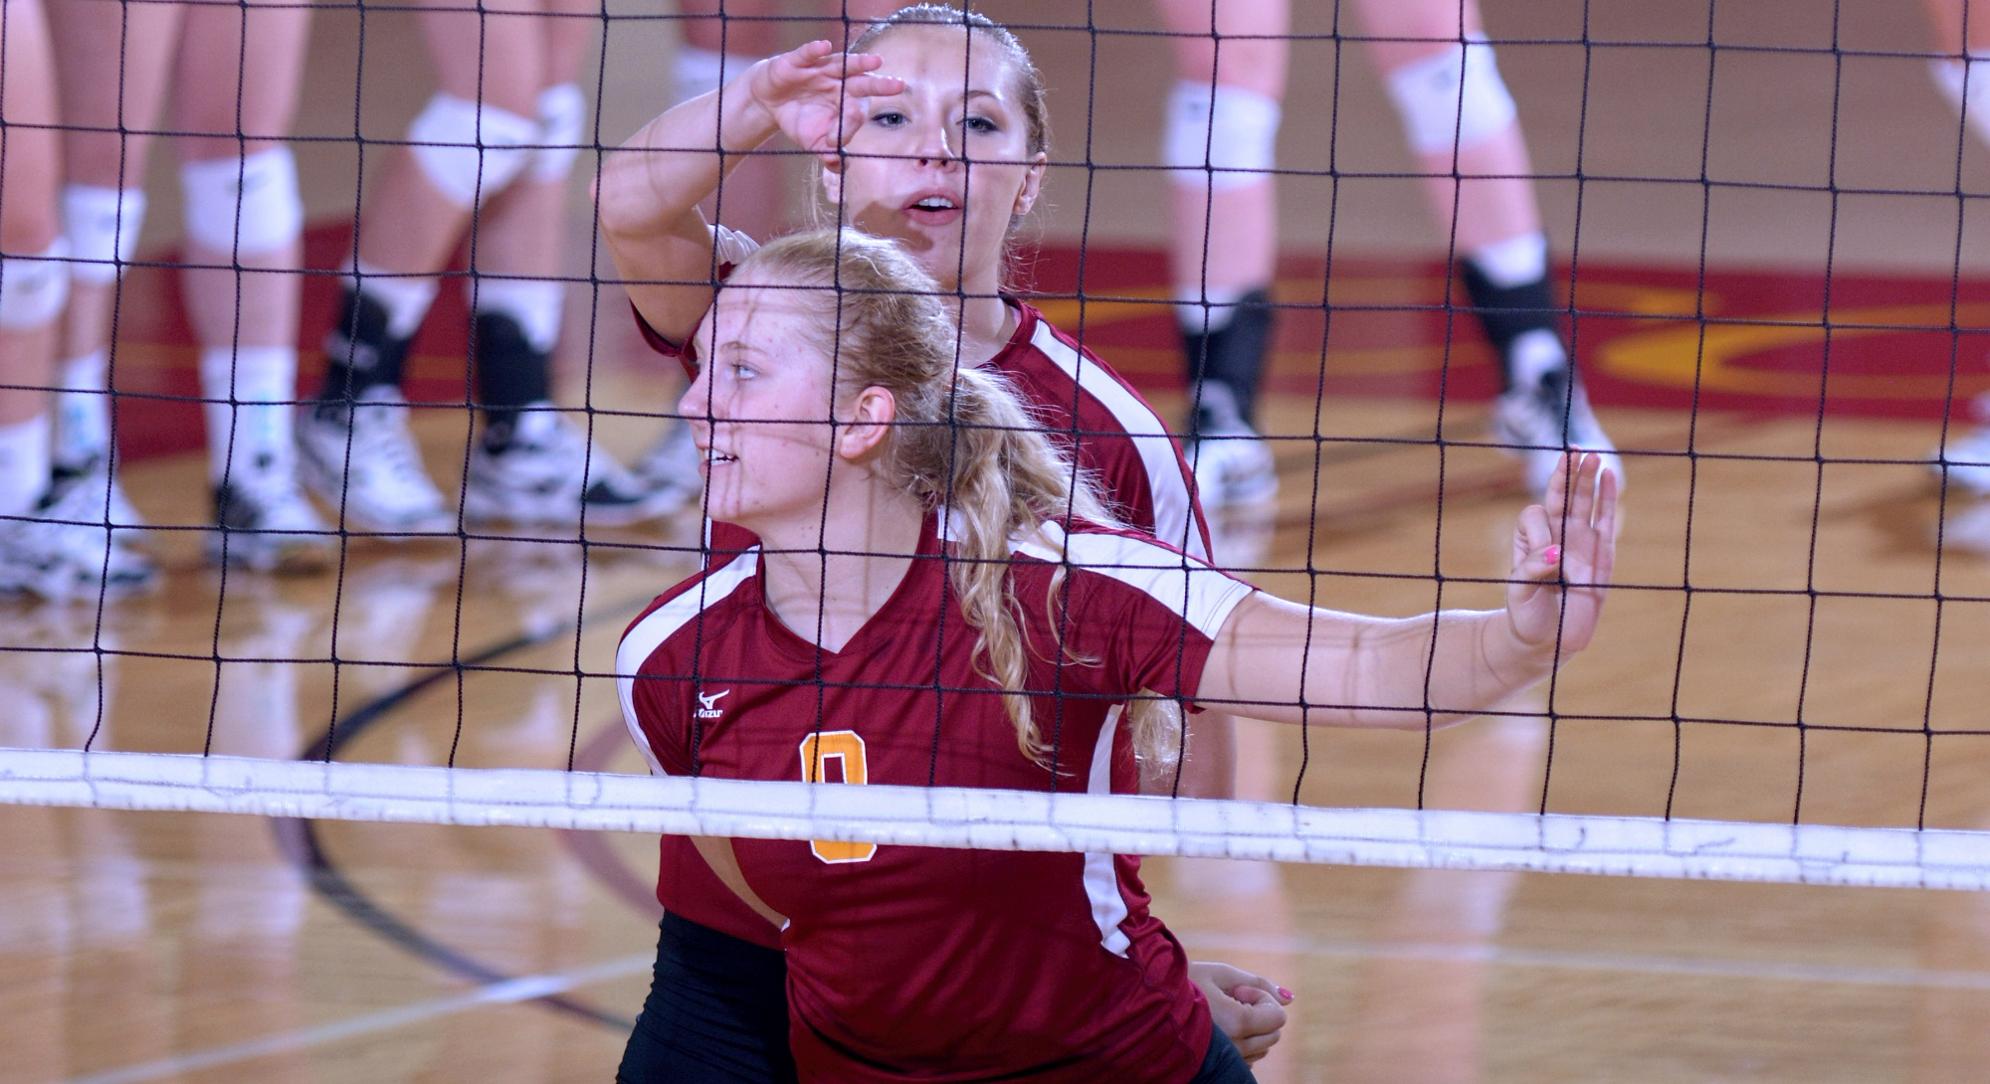 Brianna Carney (foreground) hit .520 and had a match-high 15 kills while Haley Cuppett (background) added 12 winners and hit .200 in the Cobbers' 3-1 win over St. Olaf.